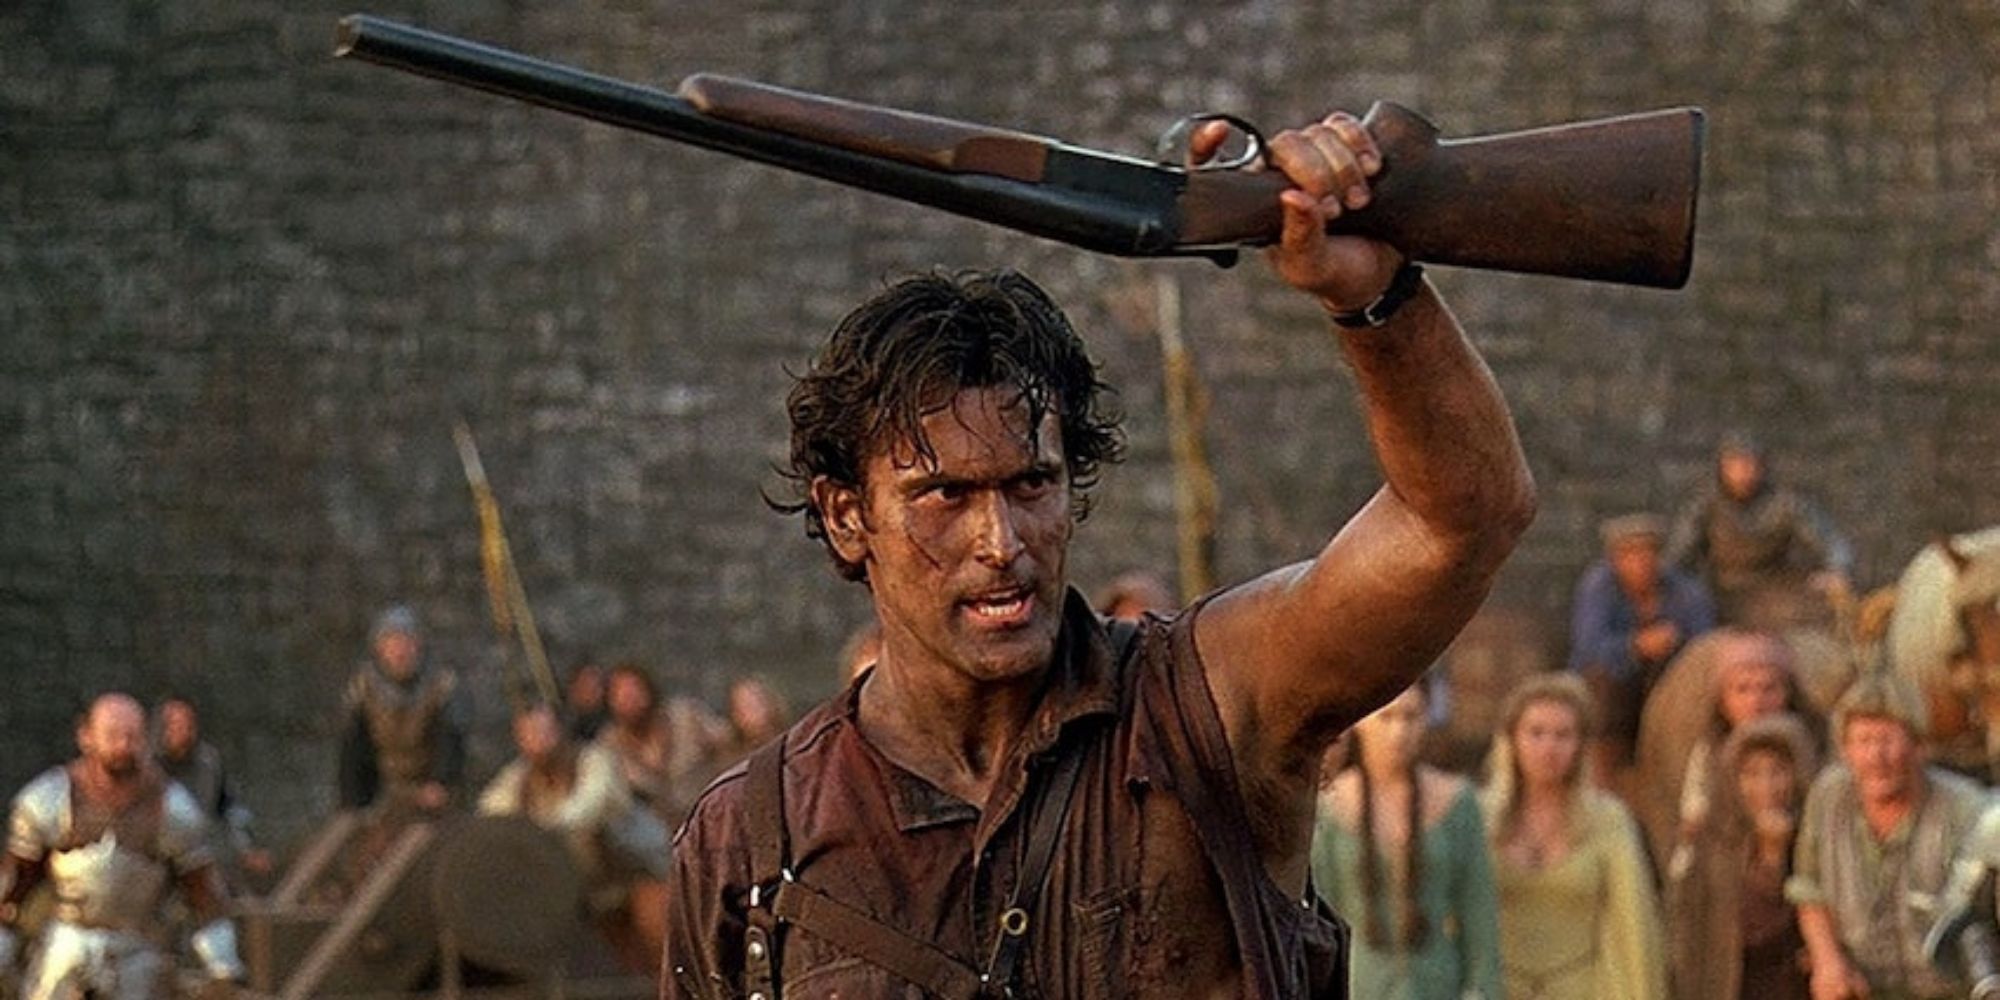 Bruce Campbell as Ash holding his boomstick in Army of Darkness